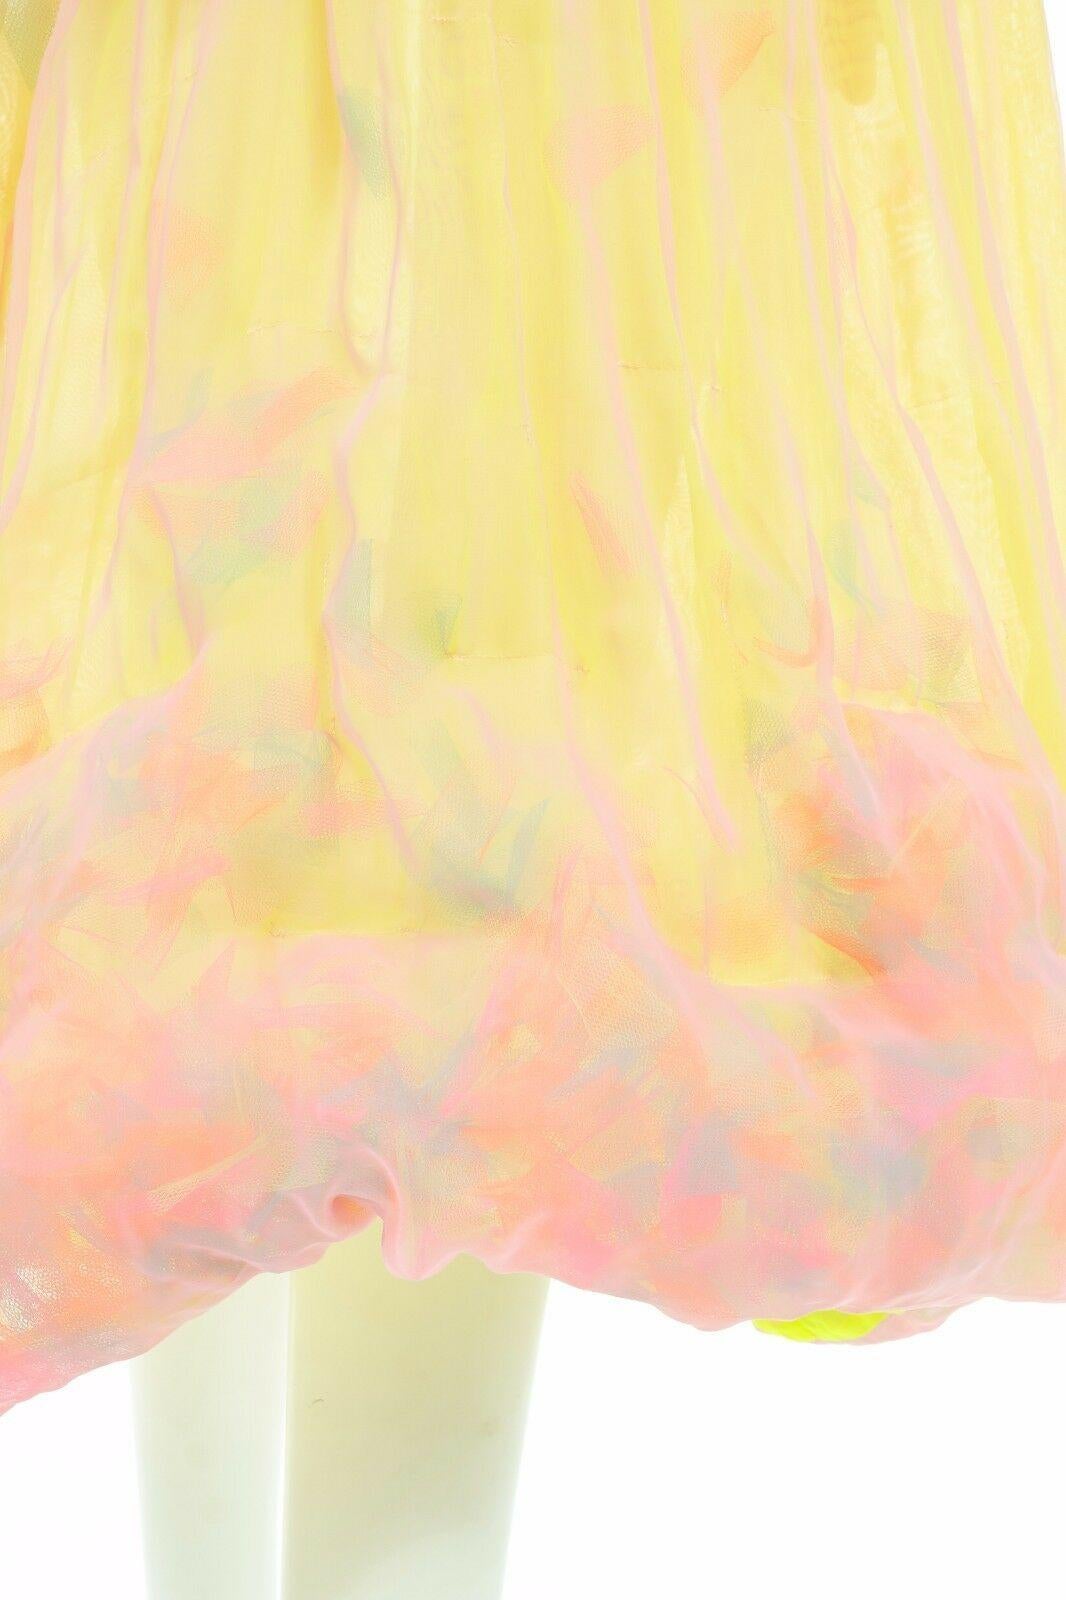 runway ISSEY MIYAKE Vintage SS01 pleated orange pink silk confetti bubble dress
ISSEY MIYAKE
FROM THE SPRING SUMMER 2001 COLLECTION
Yellow pink pleated silk. Dual layered. 
Multicolored tulle pieces confetti trapped in between the layers. U